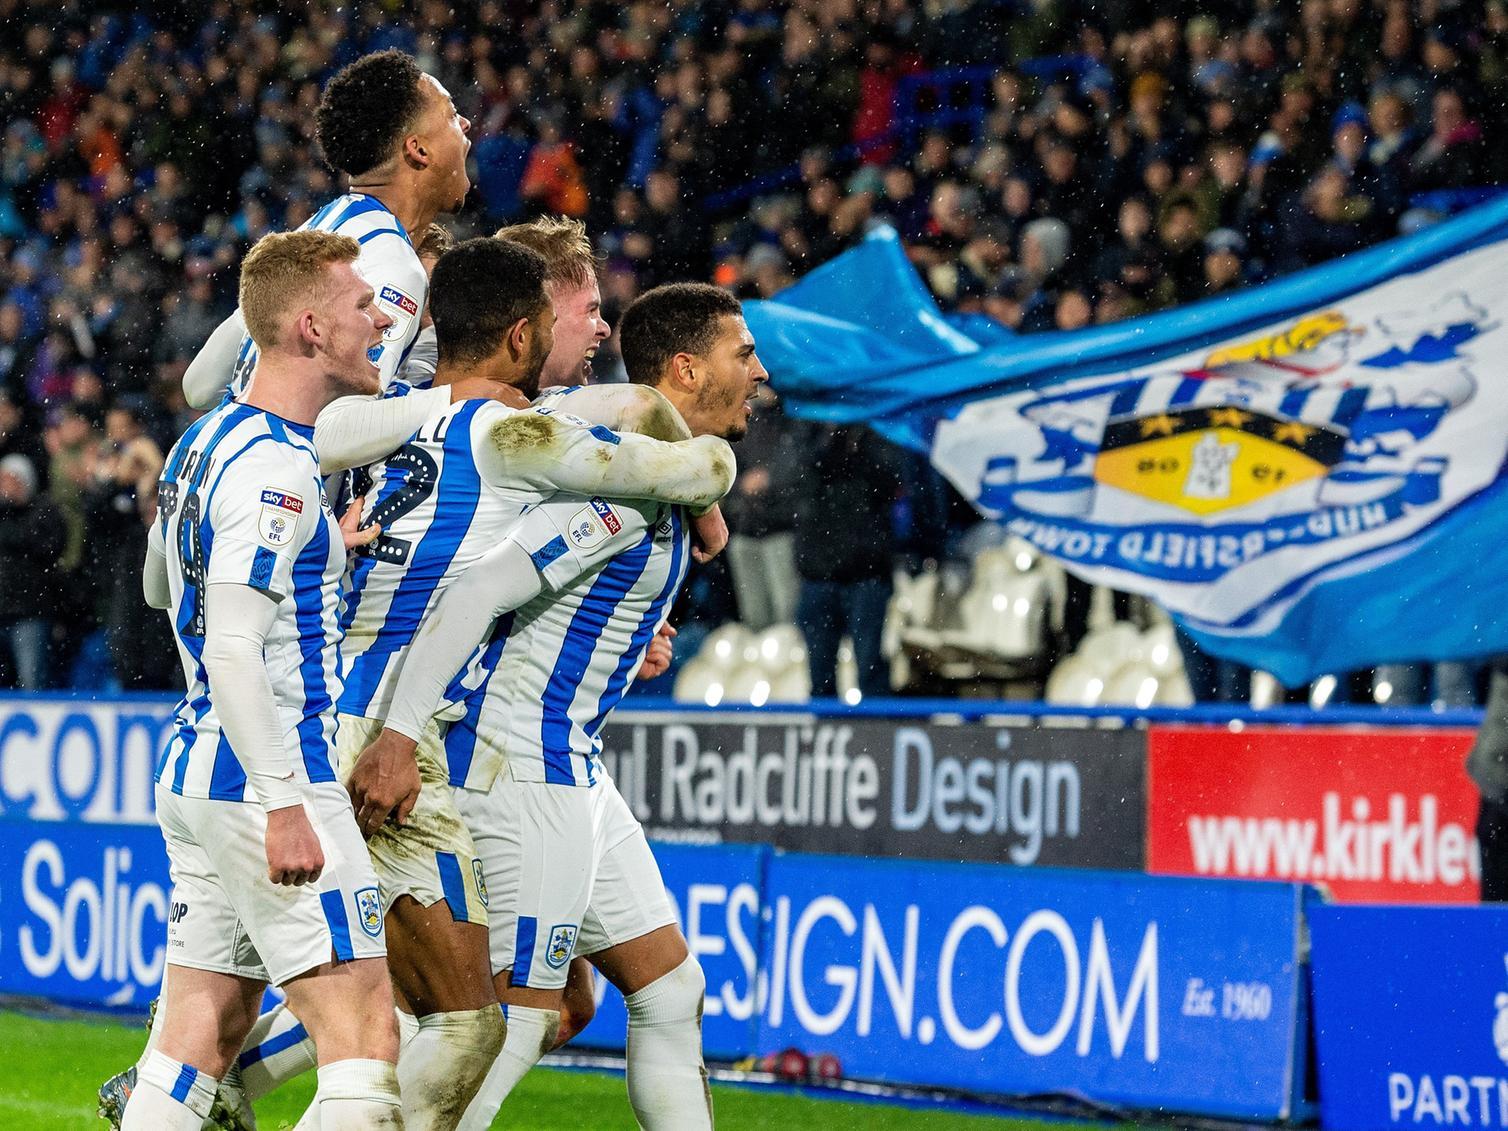 Huddersfield Town celebrate a goal in their 2-1 win against Bristol City at the John Smith's Stadium on Tuesday